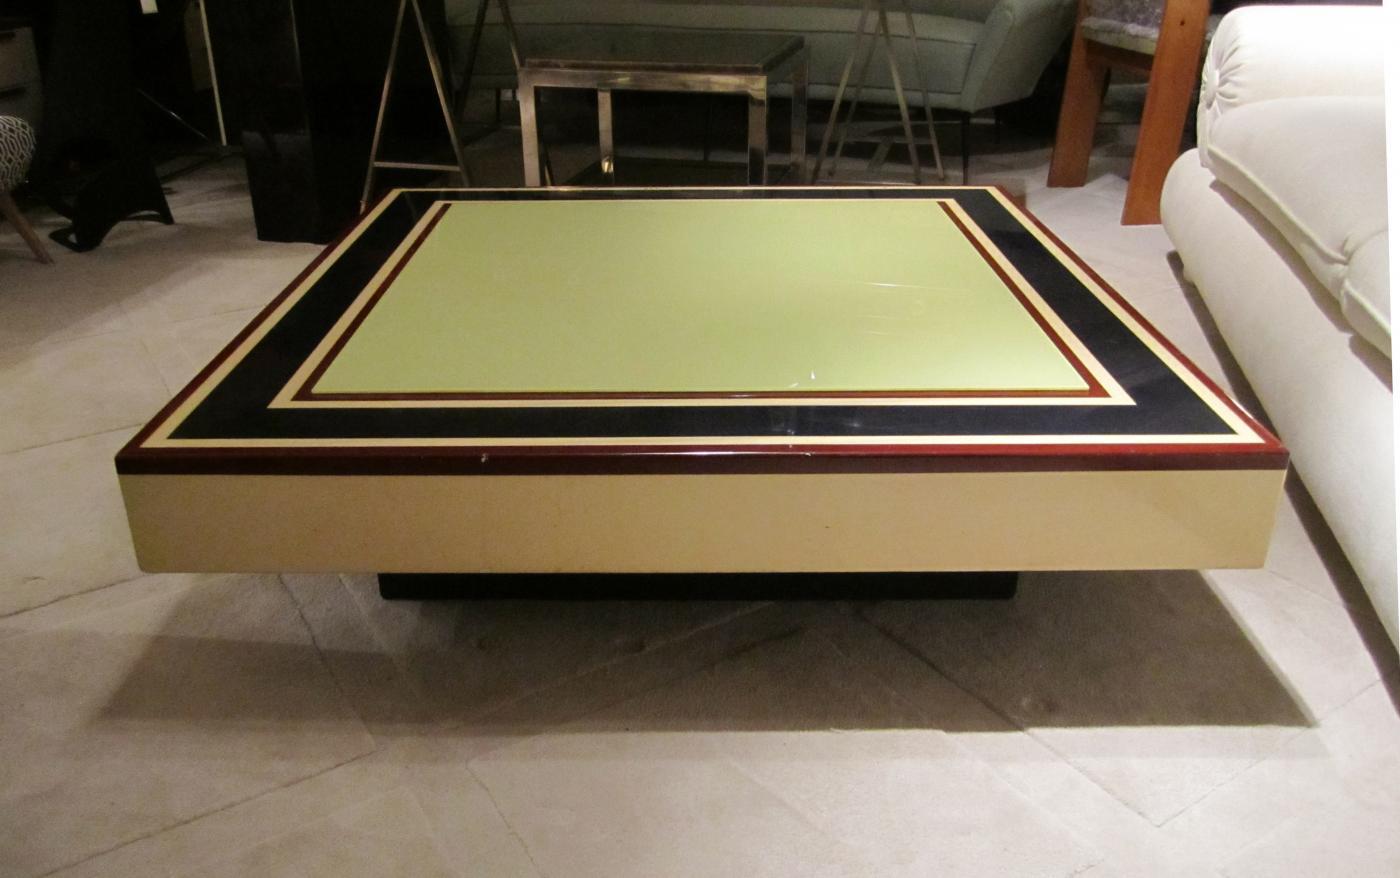 Willy Rizzo Lacquered Light Green Glass and Wood Midcentury Italian Coffee Table

Willy Rizzo, lacquered colors midcentury signed coffee table, Italy, 1970.